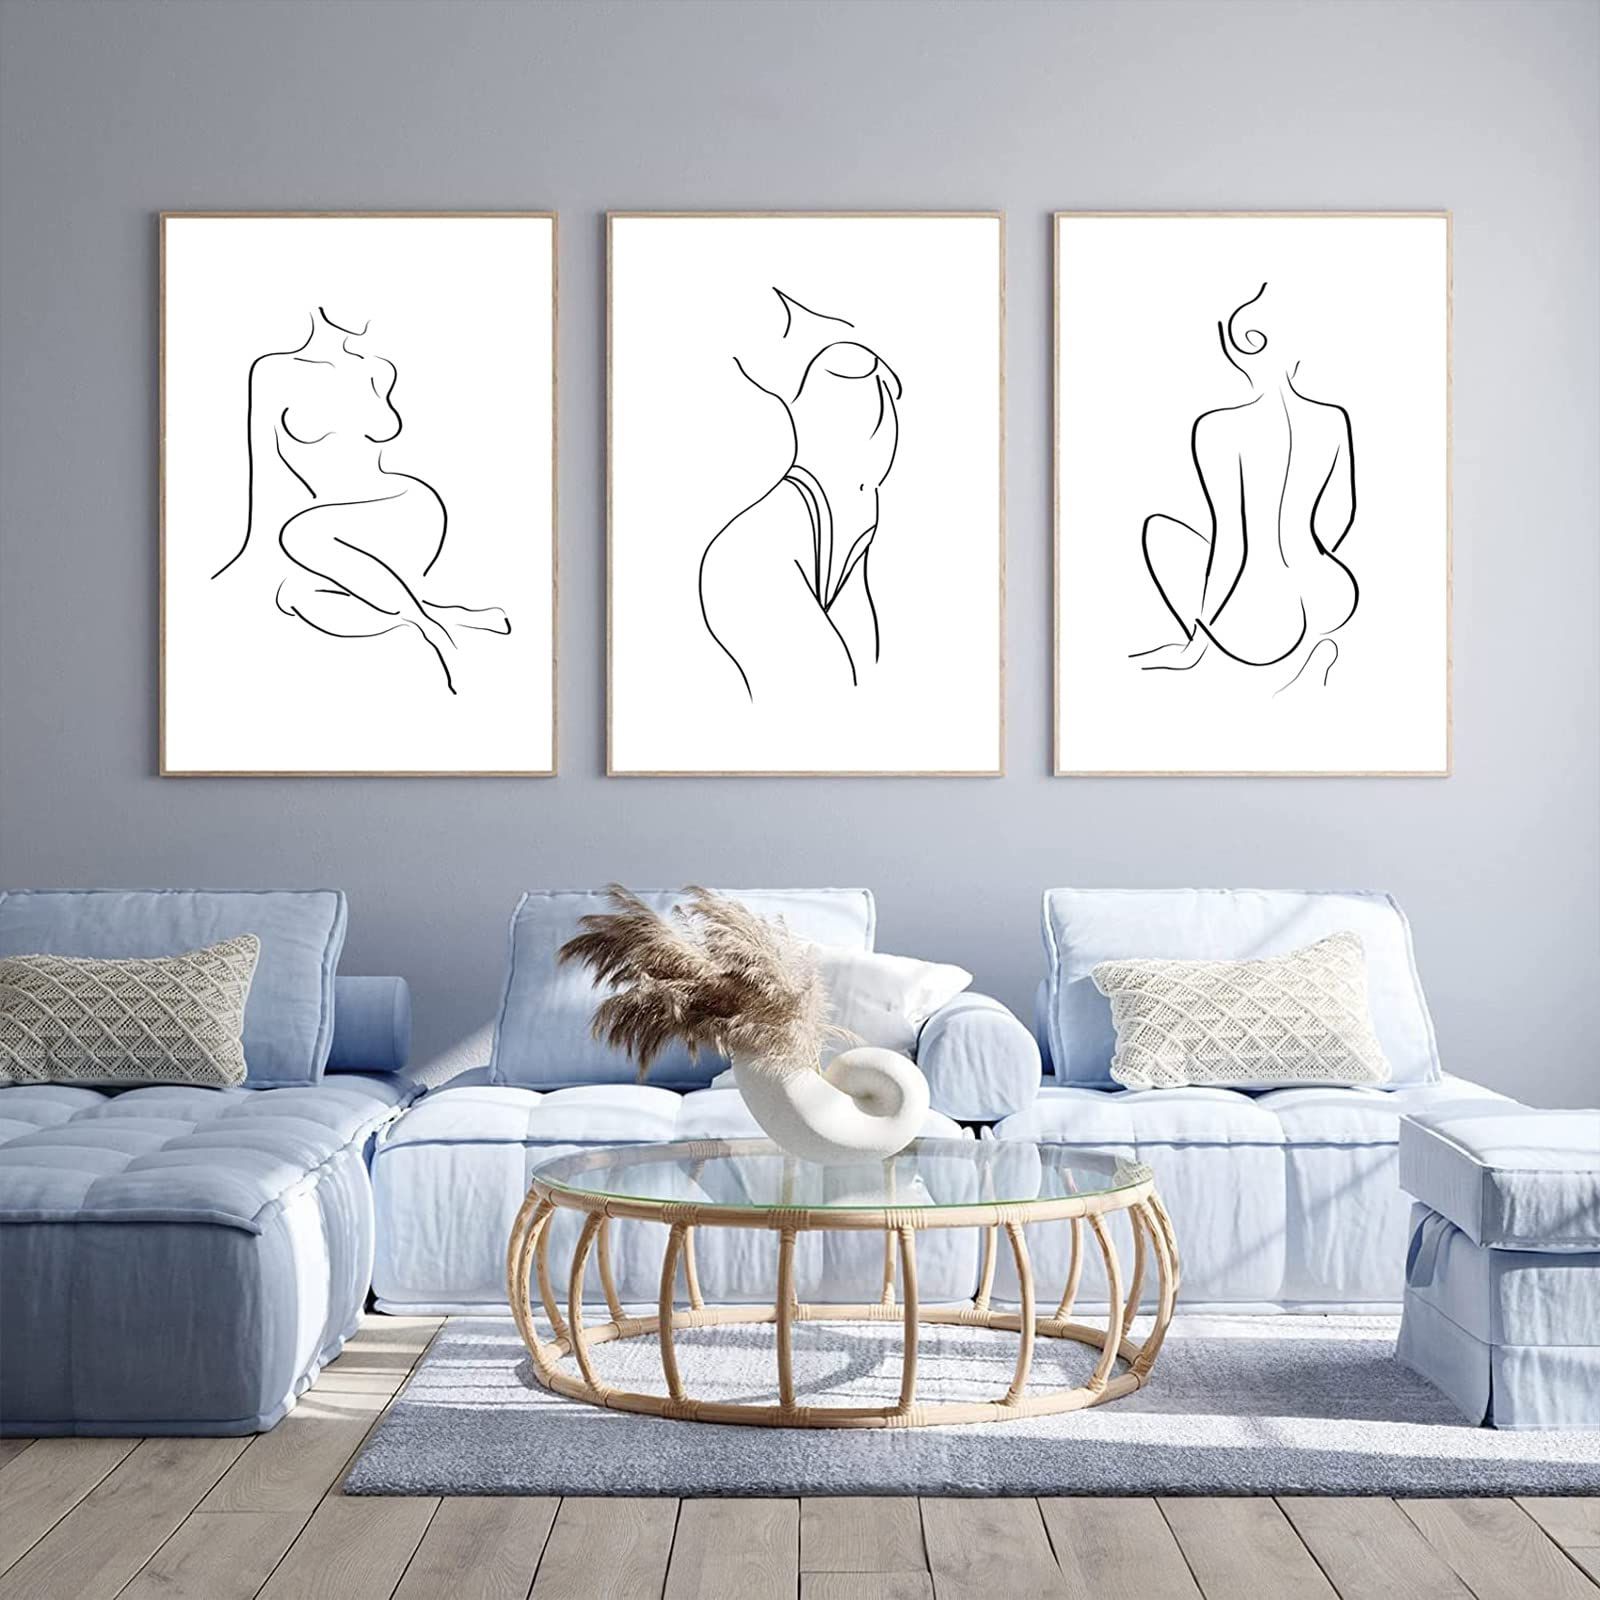 Widely Used Abstract Silhouette Wall Sculptures Throughout Amazon: Minimalist Line Wall Art Woman Body Outline Wall Art Prints  Women Figure Drawing Painting Body Line Art Wall Decor Female Wall Art  Abstract Woman Silhouette Canvas Art Aesthetic 16x24x3 Inch Unframed: (Photo 7 of 15)